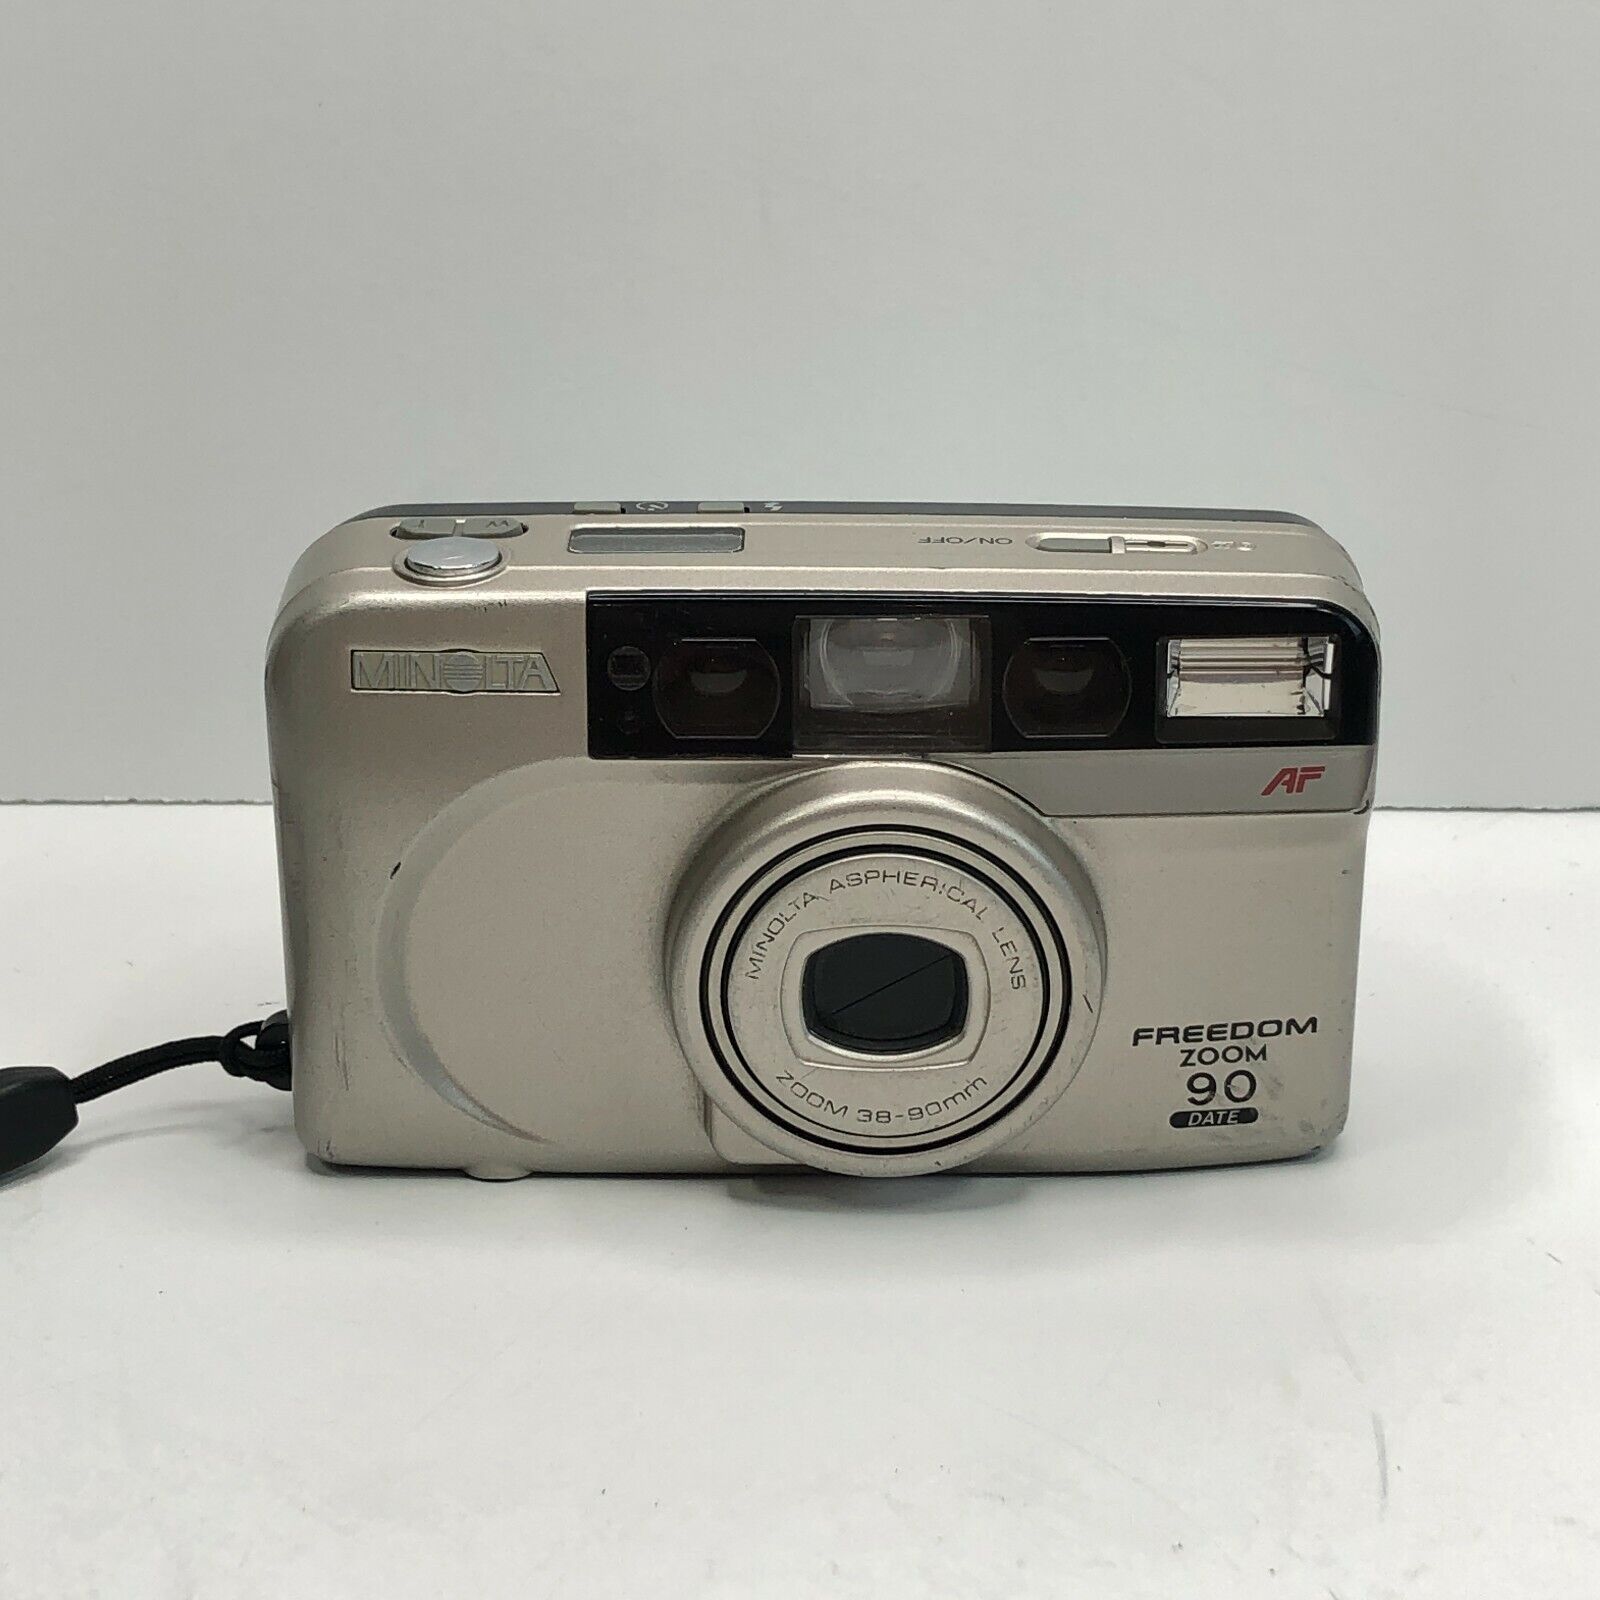 Minolta Freedom Zoom 90 Date Point & Shoot 35mm Film Camera Tested